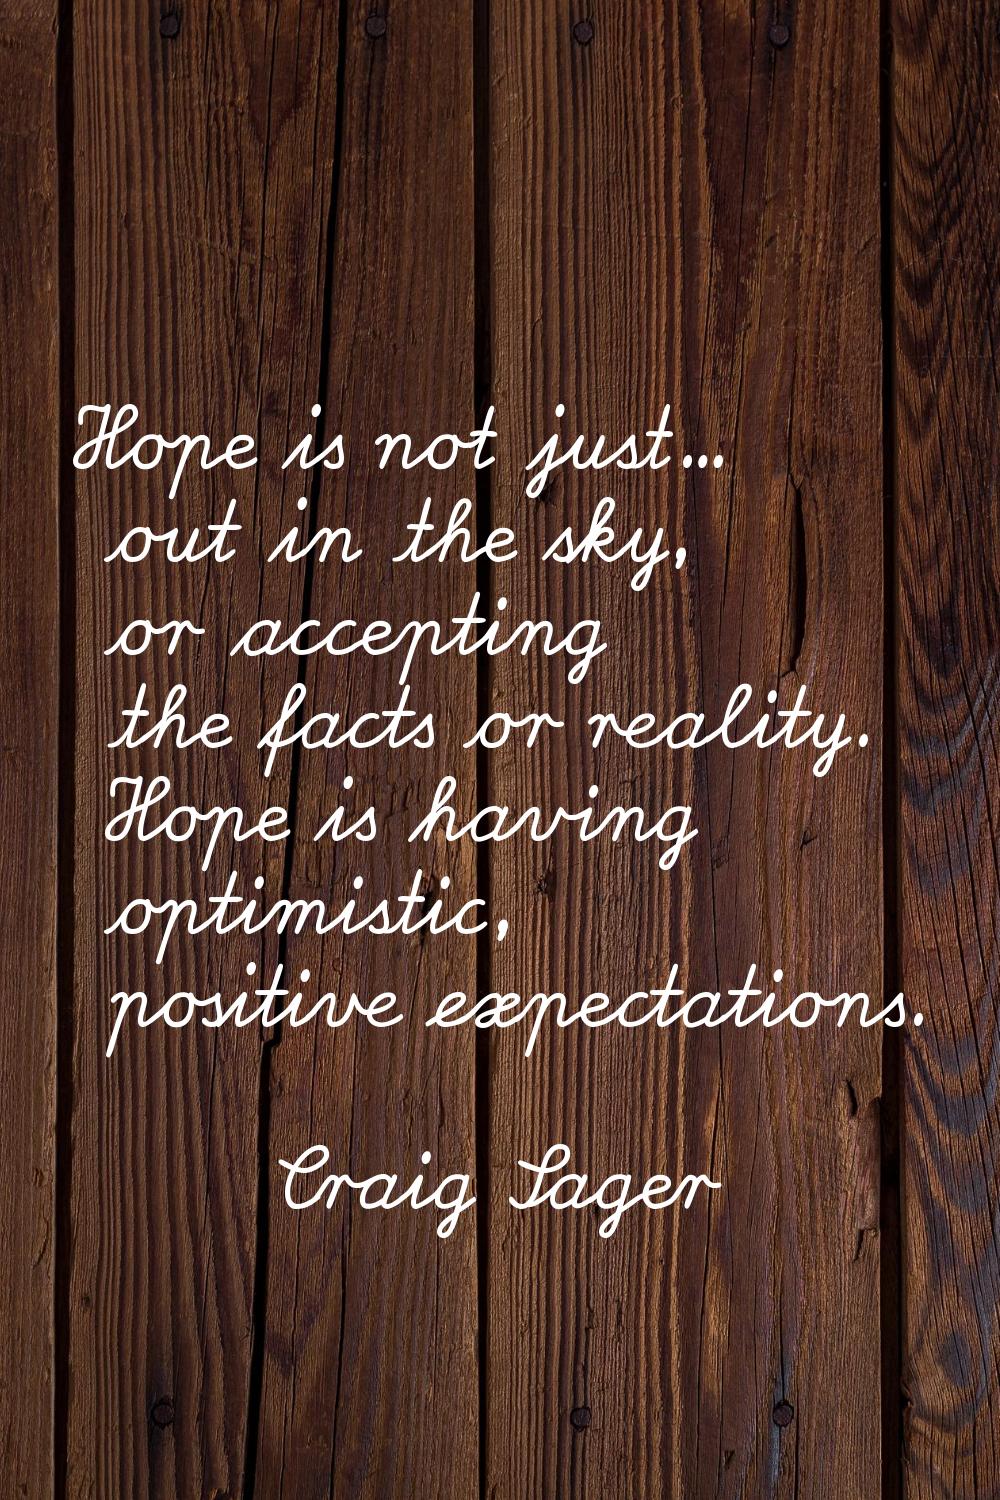 Hope is not just... out in the sky, or accepting the facts or reality. Hope is having optimistic, p